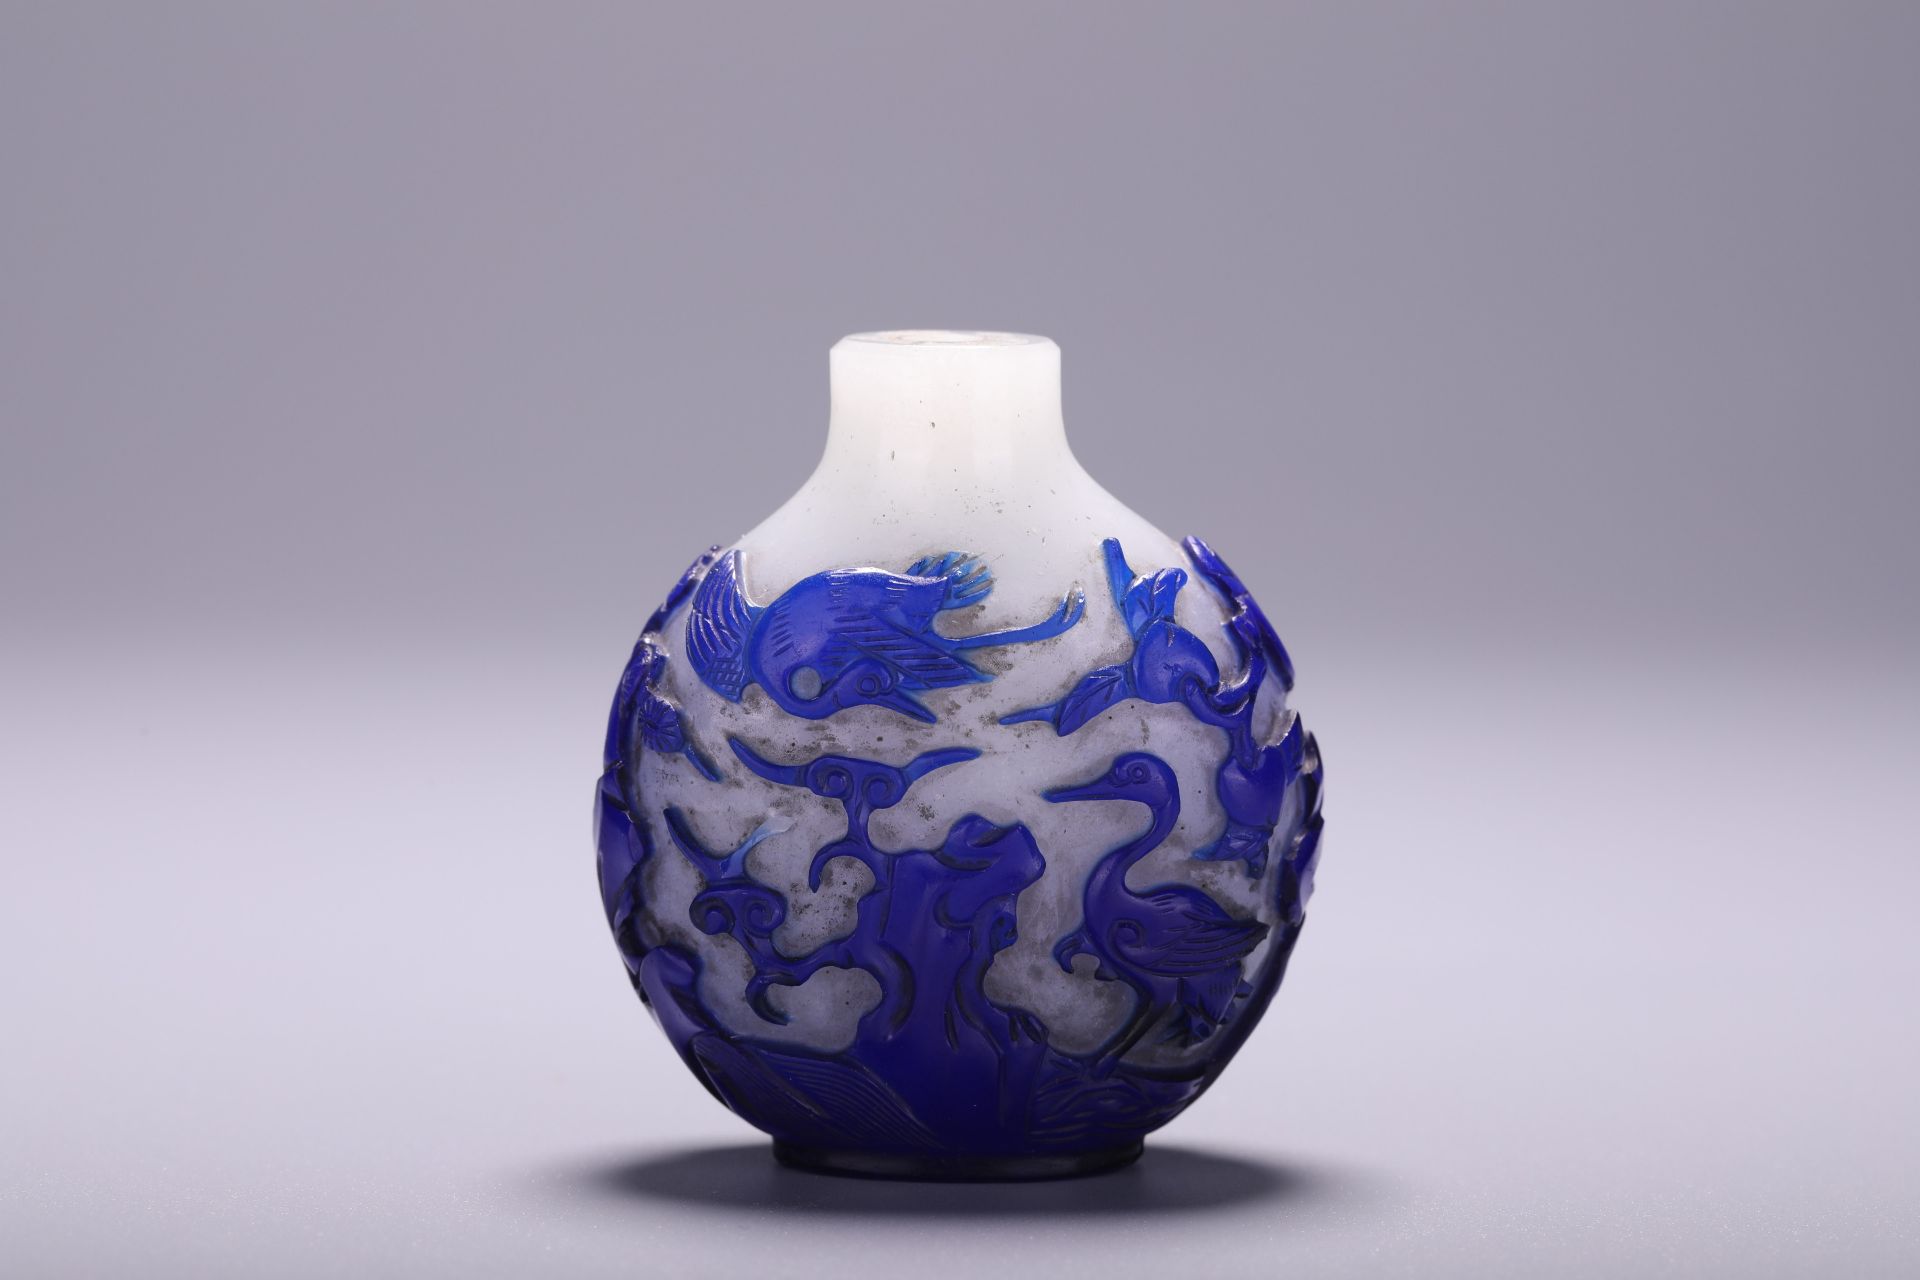 A Chinese glass snuff bottle, H 5,7 cm